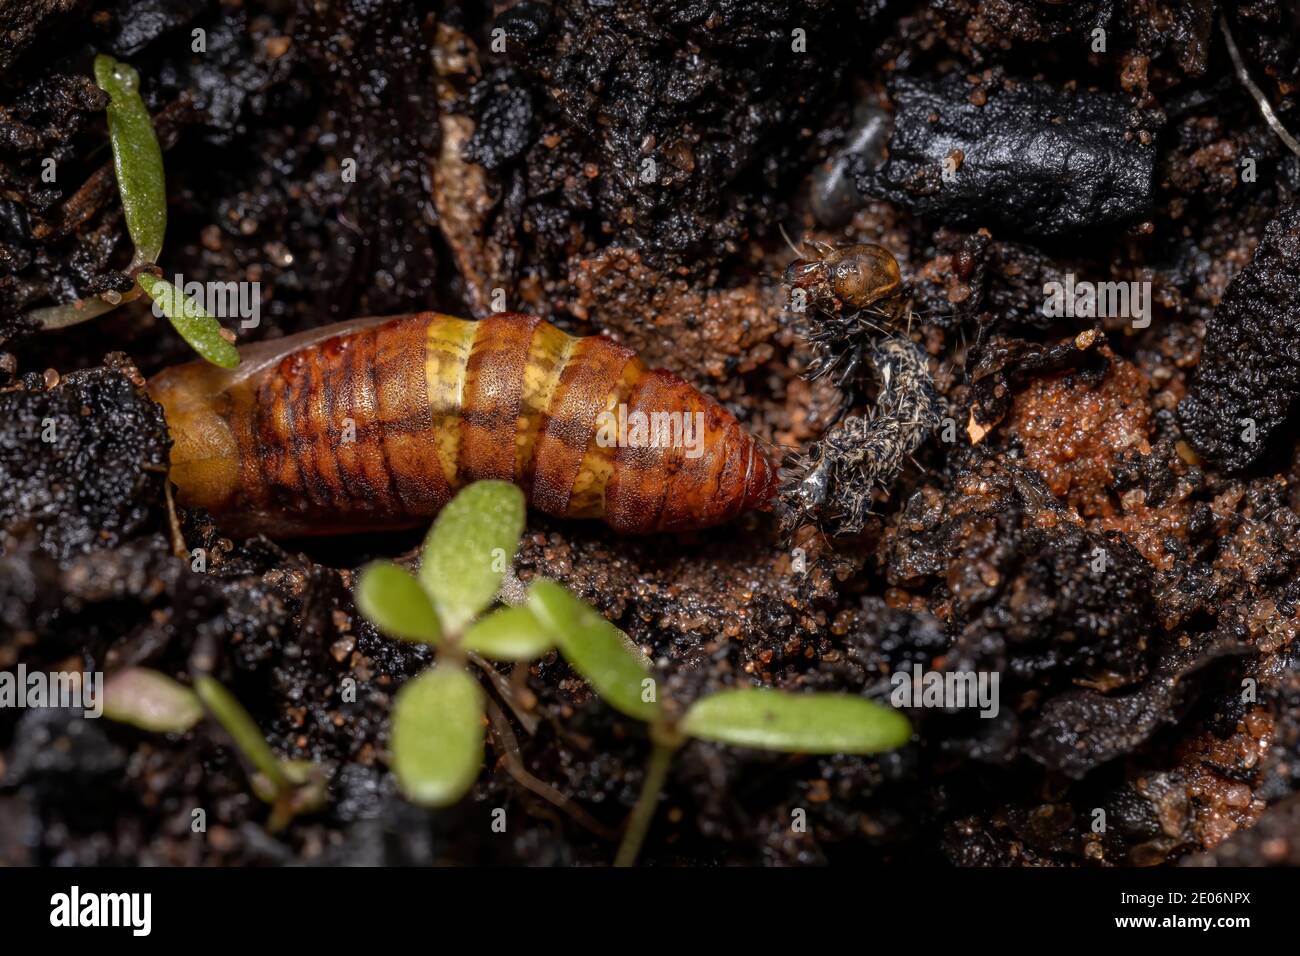 Caterpillar turning into a cocoon in the soil Stock Photo